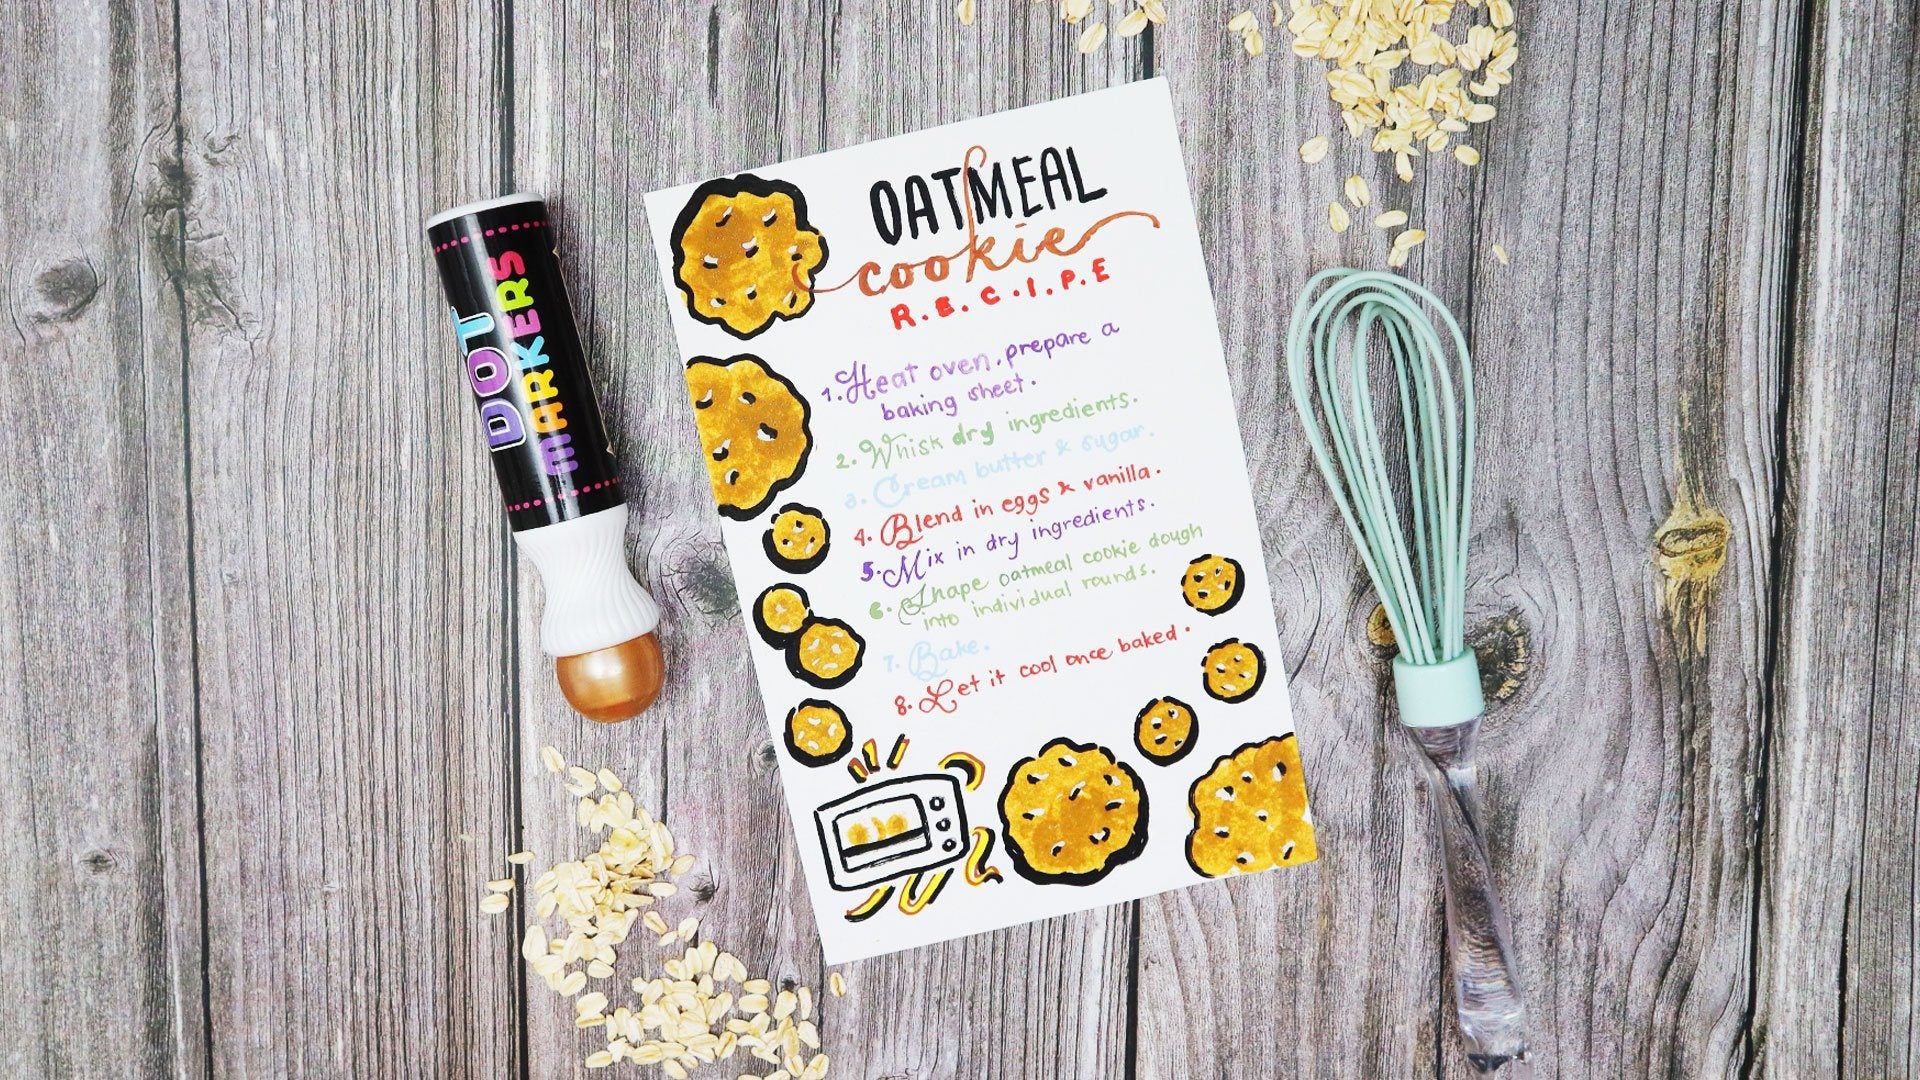 DIY Oatmeal Cookie Recipe Using Dot Markers and Chalk Markers